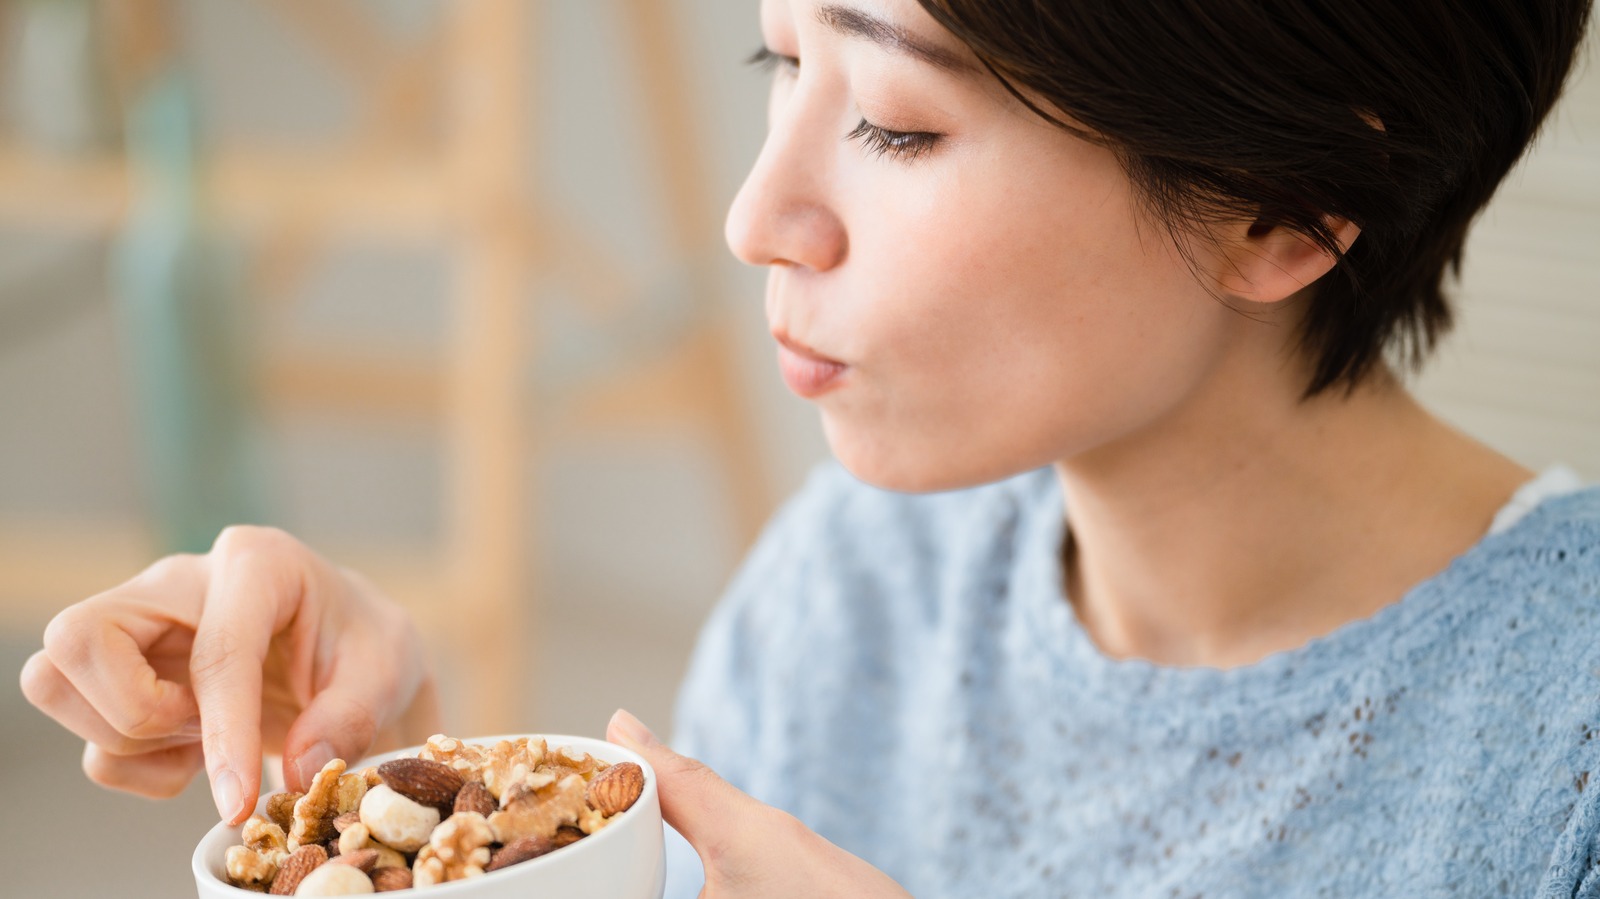 When You Eat Cashews Every Day, This Is What Happens To Your Cholesterol - Health Digest